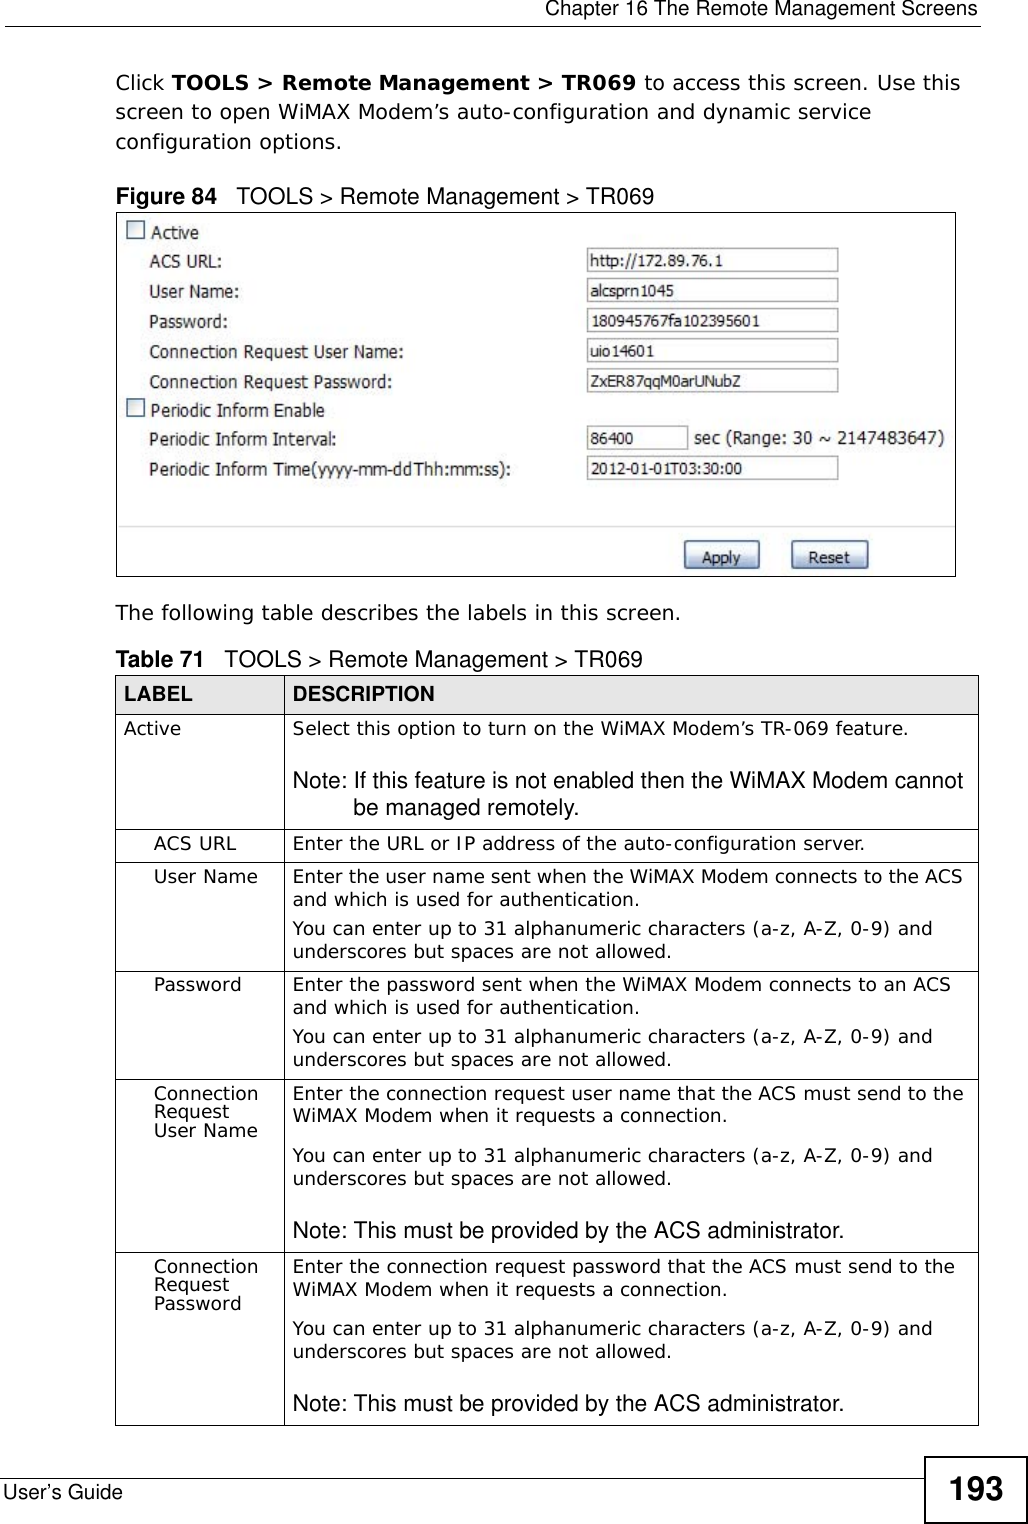  Chapter 16 The Remote Management ScreensUser’s Guide 193Click TOOLS &gt; Remote Management &gt; TR069 to access this screen. Use this screen to open WiMAX Modem’s auto-configuration and dynamic service configuration options.Figure 84   TOOLS &gt; Remote Management &gt; TR069The following table describes the labels in this screen.Table 71   TOOLS &gt; Remote Management &gt; TR069LABEL DESCRIPTIONActive Select this option to turn on the WiMAX Modem’s TR-069 feature. Note: If this feature is not enabled then the WiMAX Modem cannot be managed remotely.ACS URL Enter the URL or IP address of the auto-configuration server.User Name Enter the user name sent when the WiMAX Modem connects to the ACS and which is used for authentication.You can enter up to 31 alphanumeric characters (a-z, A-Z, 0-9) and underscores but spaces are not allowed.Password Enter the password sent when the WiMAX Modem connects to an ACS and which is used for authentication.You can enter up to 31 alphanumeric characters (a-z, A-Z, 0-9) and underscores but spaces are not allowed.Connection Request User NameEnter the connection request user name that the ACS must send to the WiMAX Modem when it requests a connection.You can enter up to 31 alphanumeric characters (a-z, A-Z, 0-9) and underscores but spaces are not allowed.Note: This must be provided by the ACS administrator.Connection Request PasswordEnter the connection request password that the ACS must send to the WiMAX Modem when it requests a connection.You can enter up to 31 alphanumeric characters (a-z, A-Z, 0-9) and underscores but spaces are not allowed.Note: This must be provided by the ACS administrator.